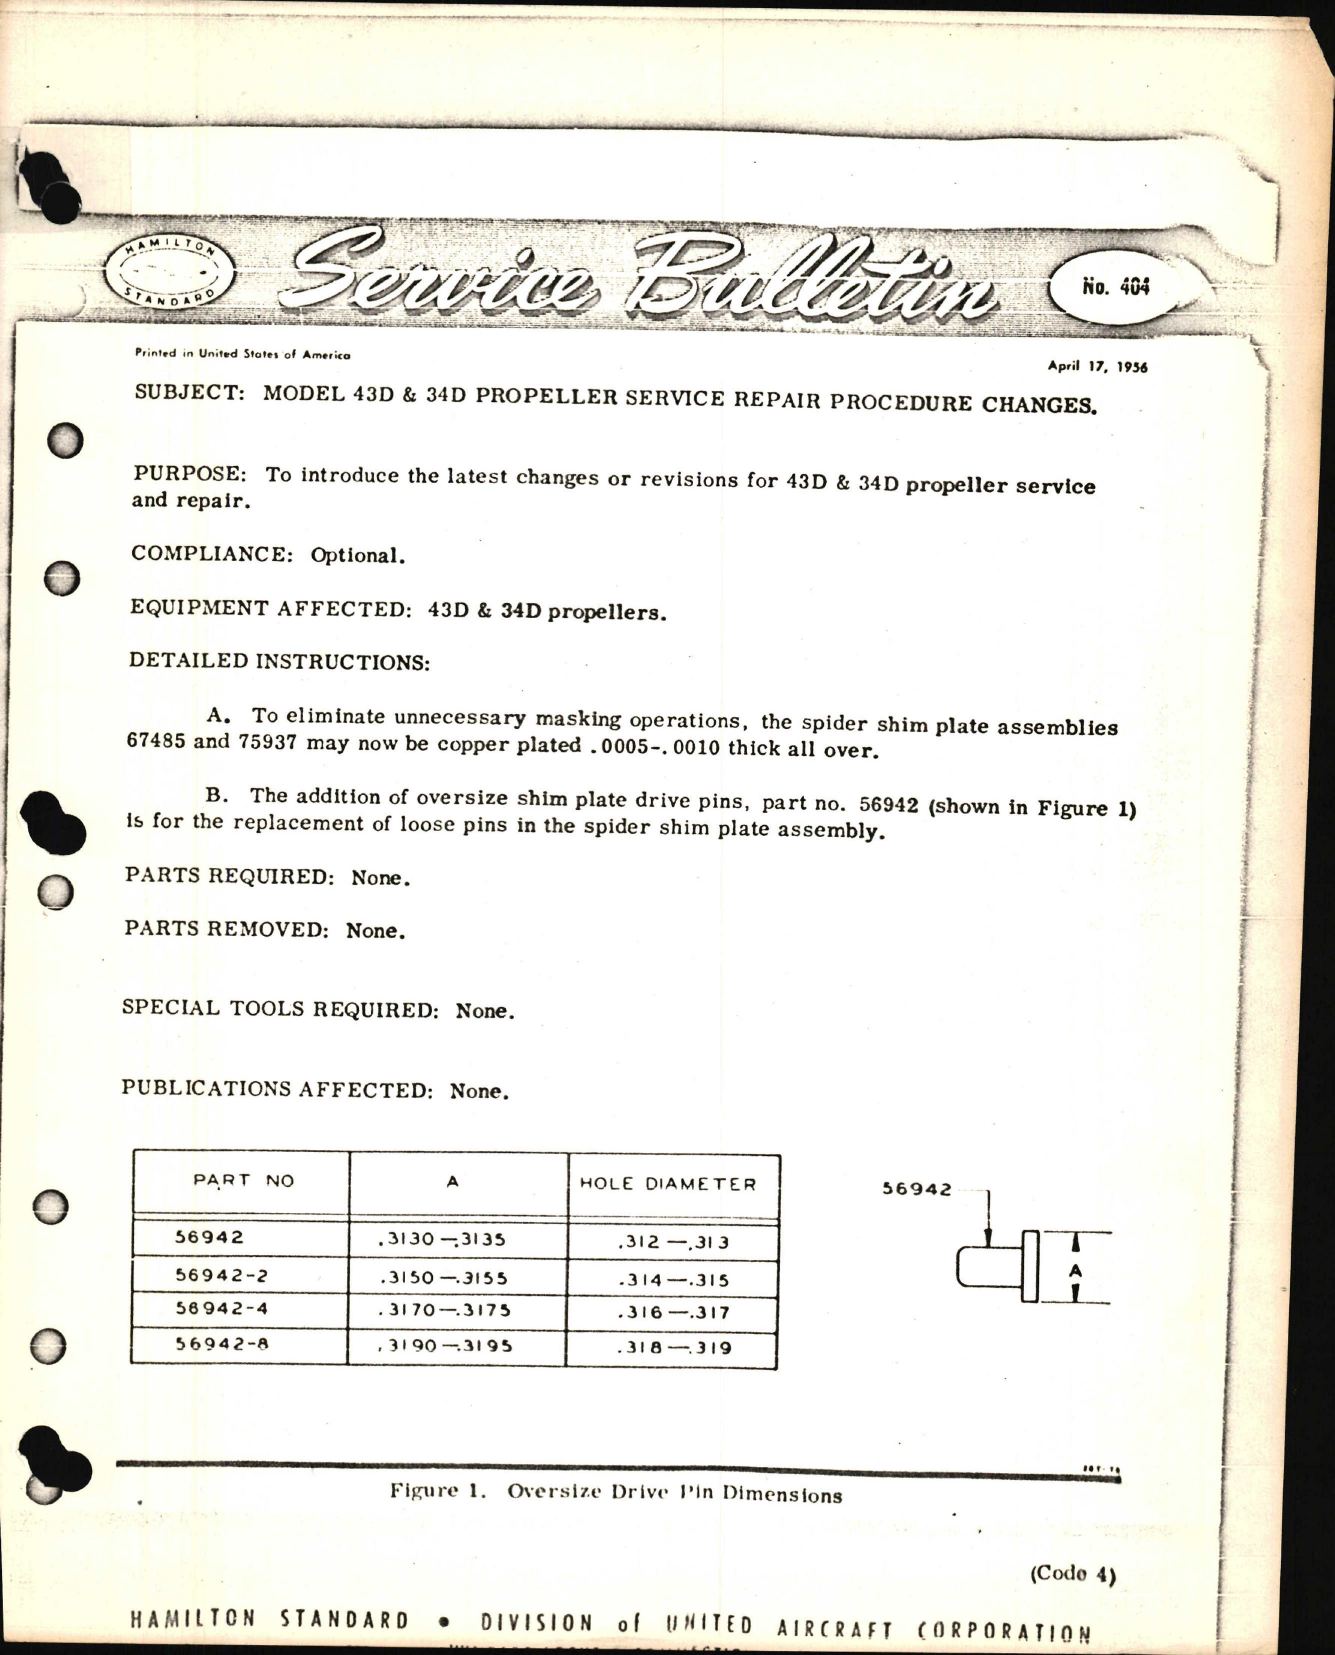 Sample page 1 from AirCorps Library document: Model 43D and 34D Propeller Service Repair Procedure Changes